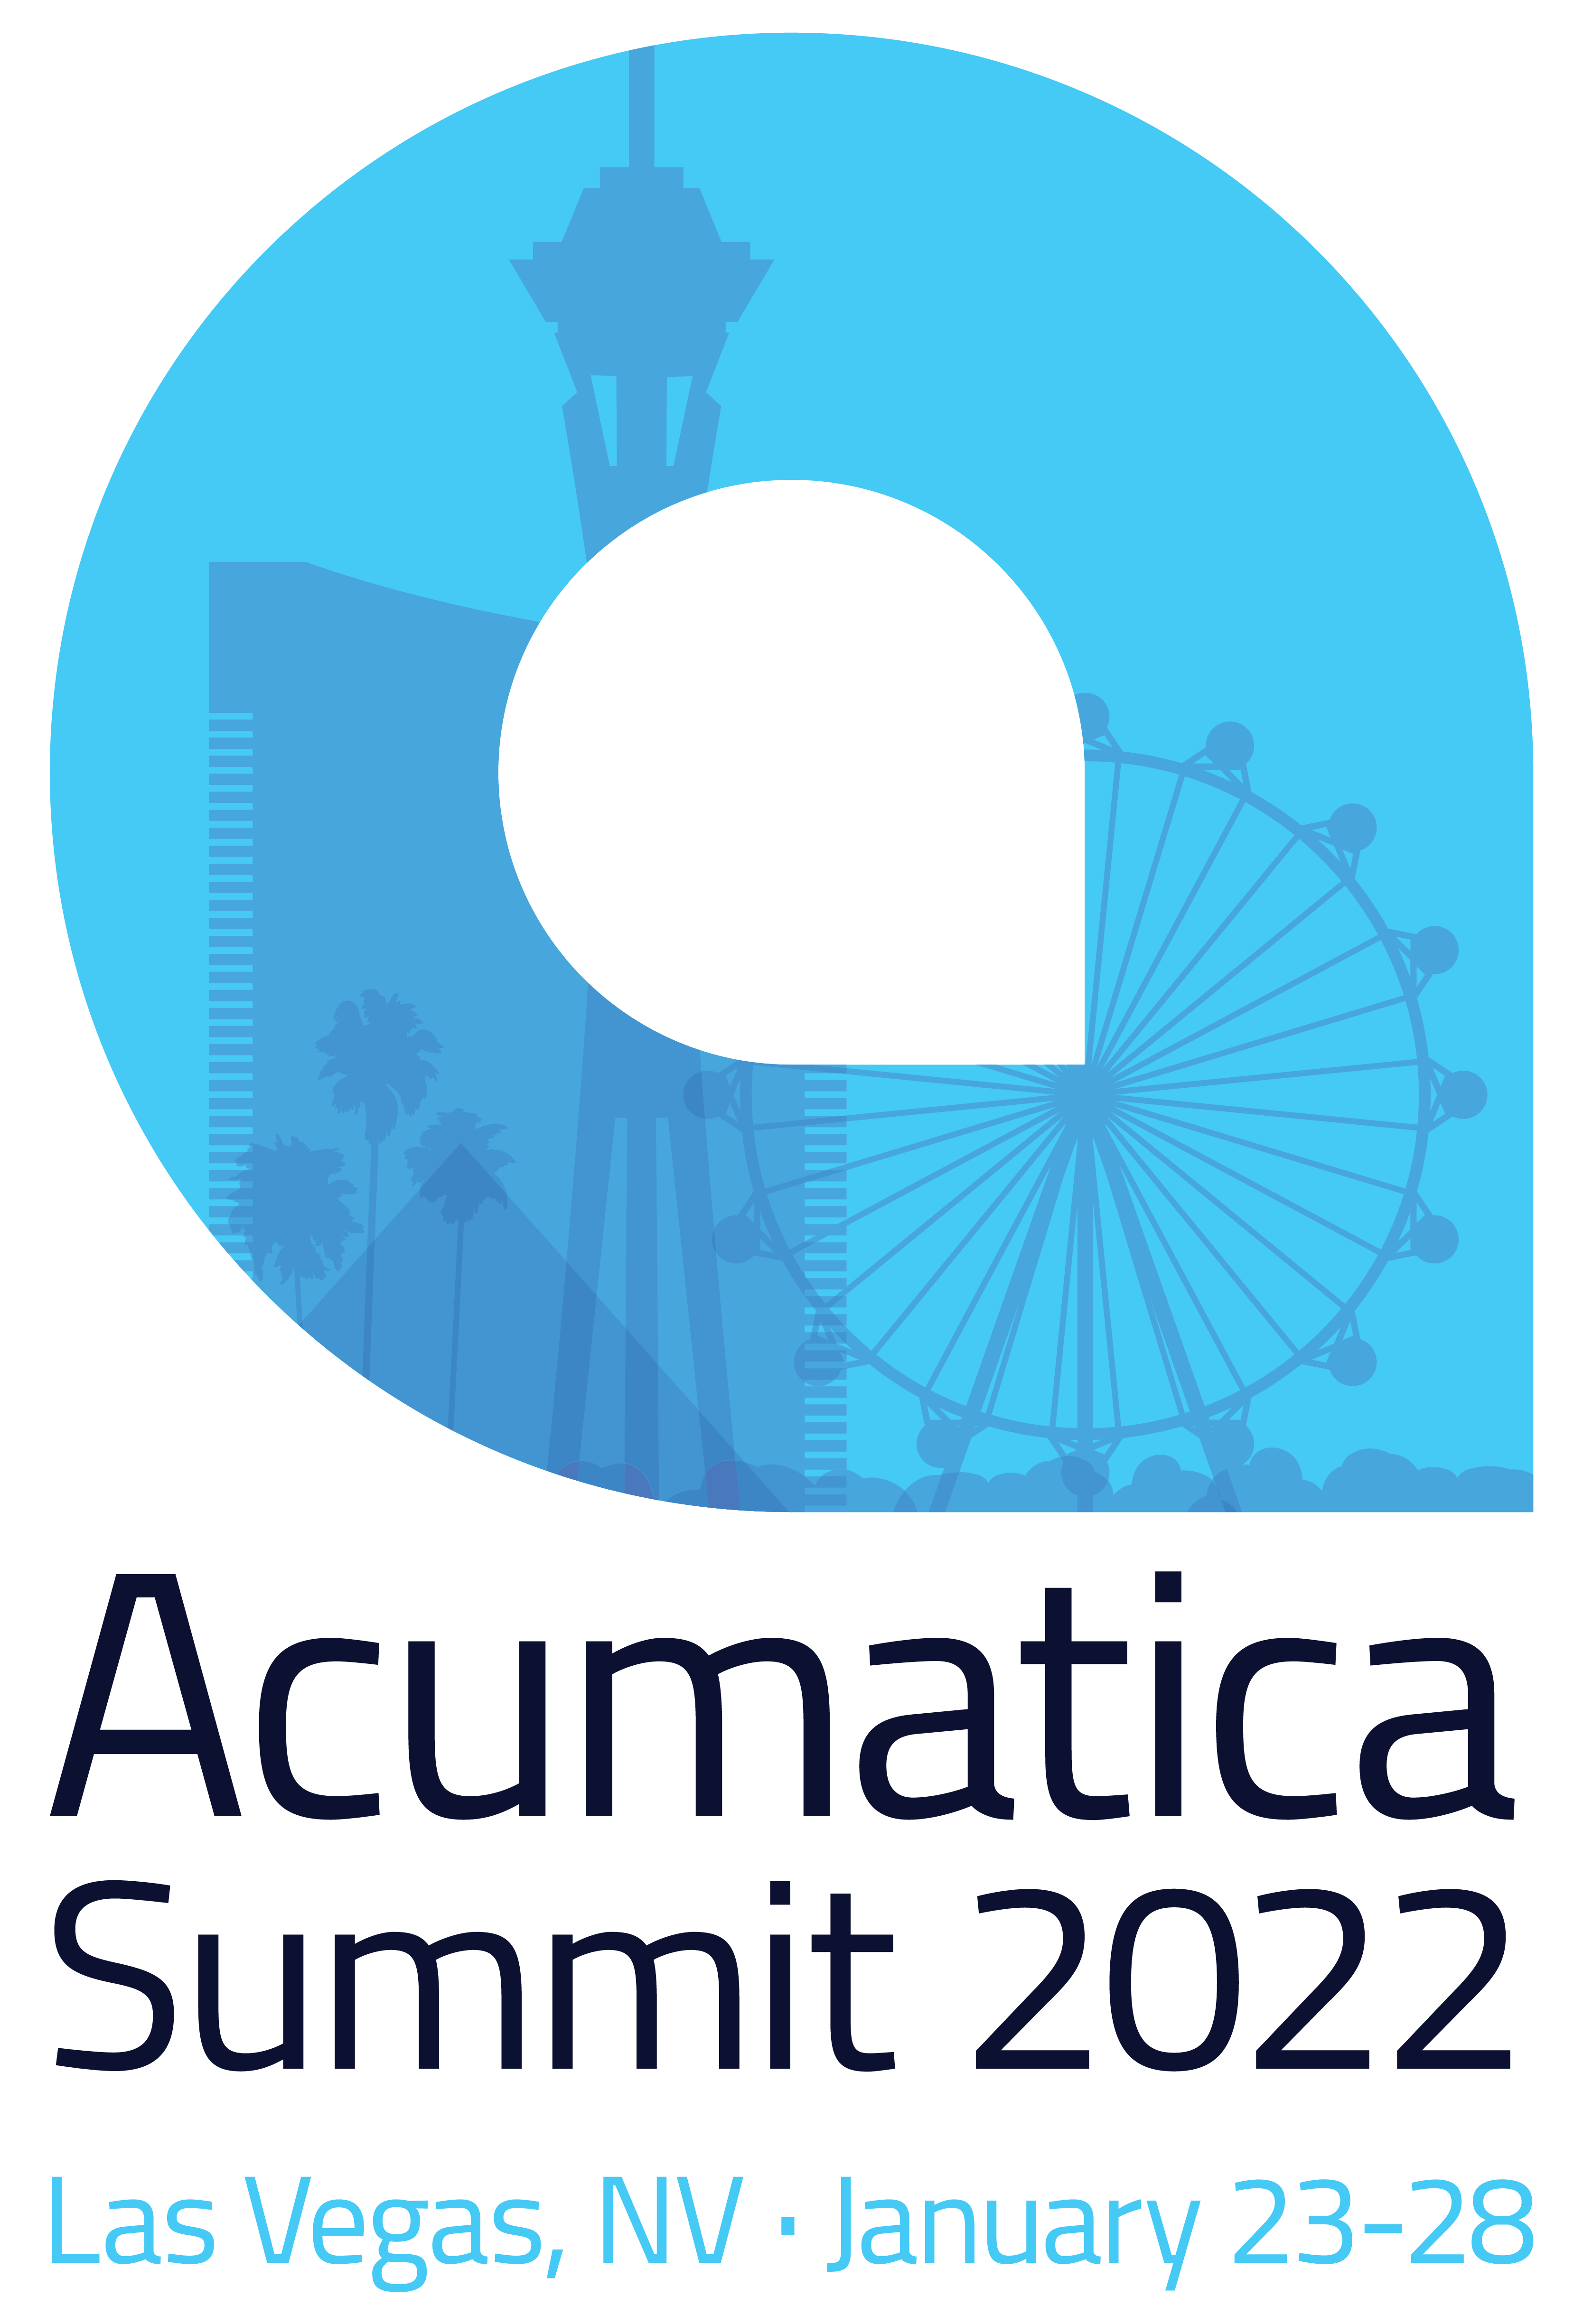 Acumatica Summit 2022 Only 4 days left to save with Early Bird Pricing